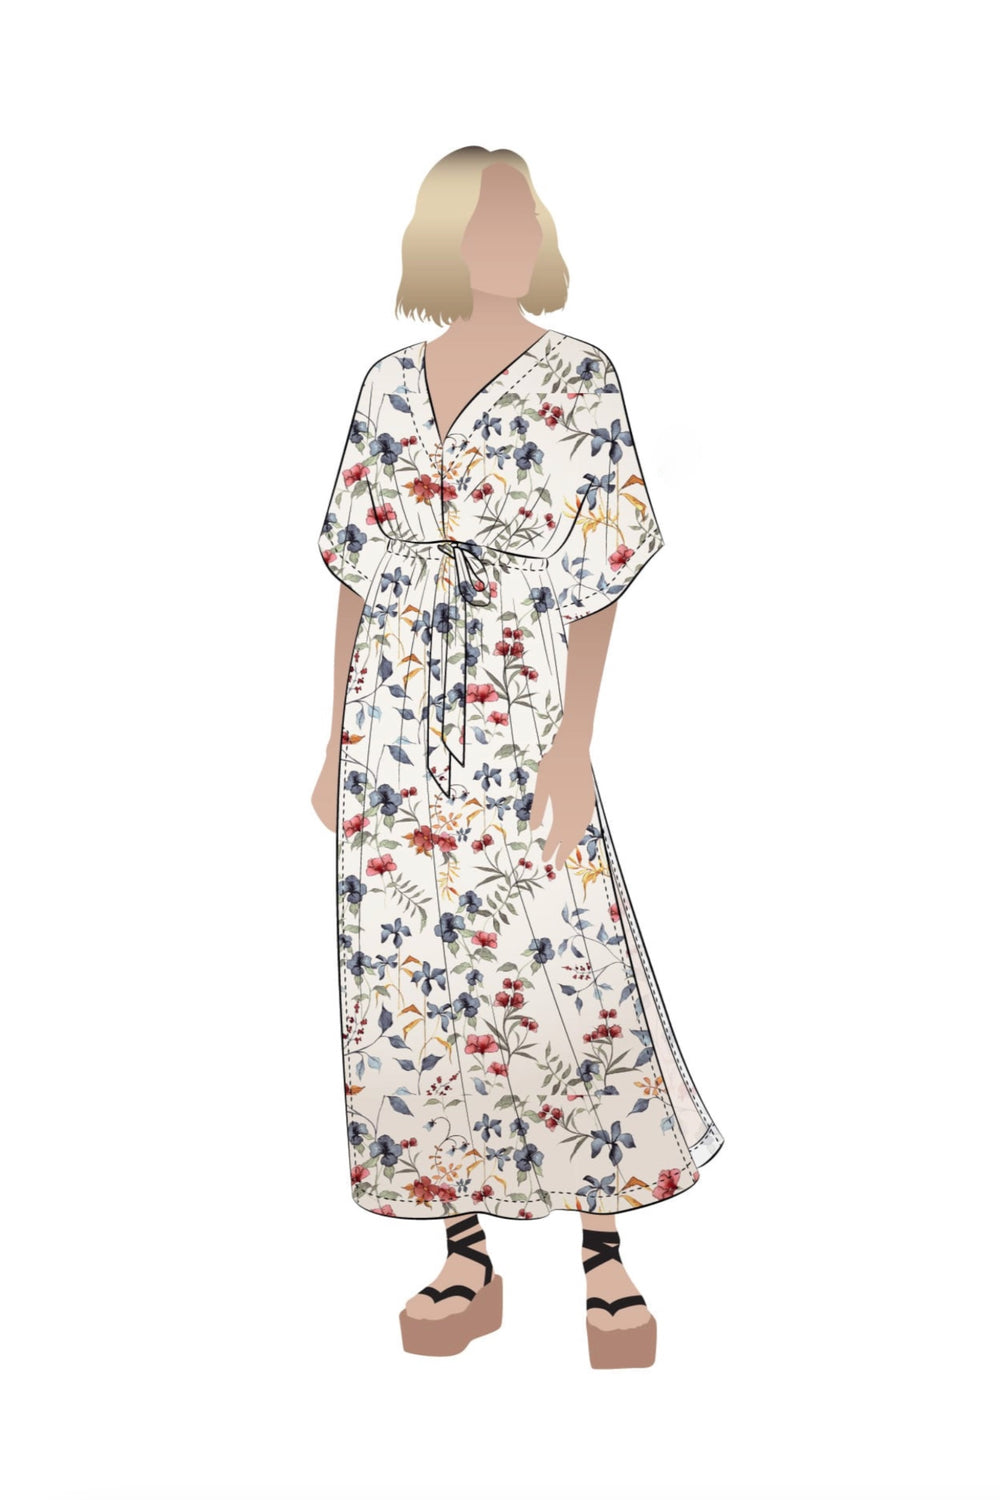 Illustration of a woman wearing the Summer Coverup sewing pattern from Style Arc on The Fold Line. A caftan style dress pattern made in silk, rayon, or any soft woven fabric, featuring a V neck, extended shoulder line, wide floaty sleeves, a drawstring un